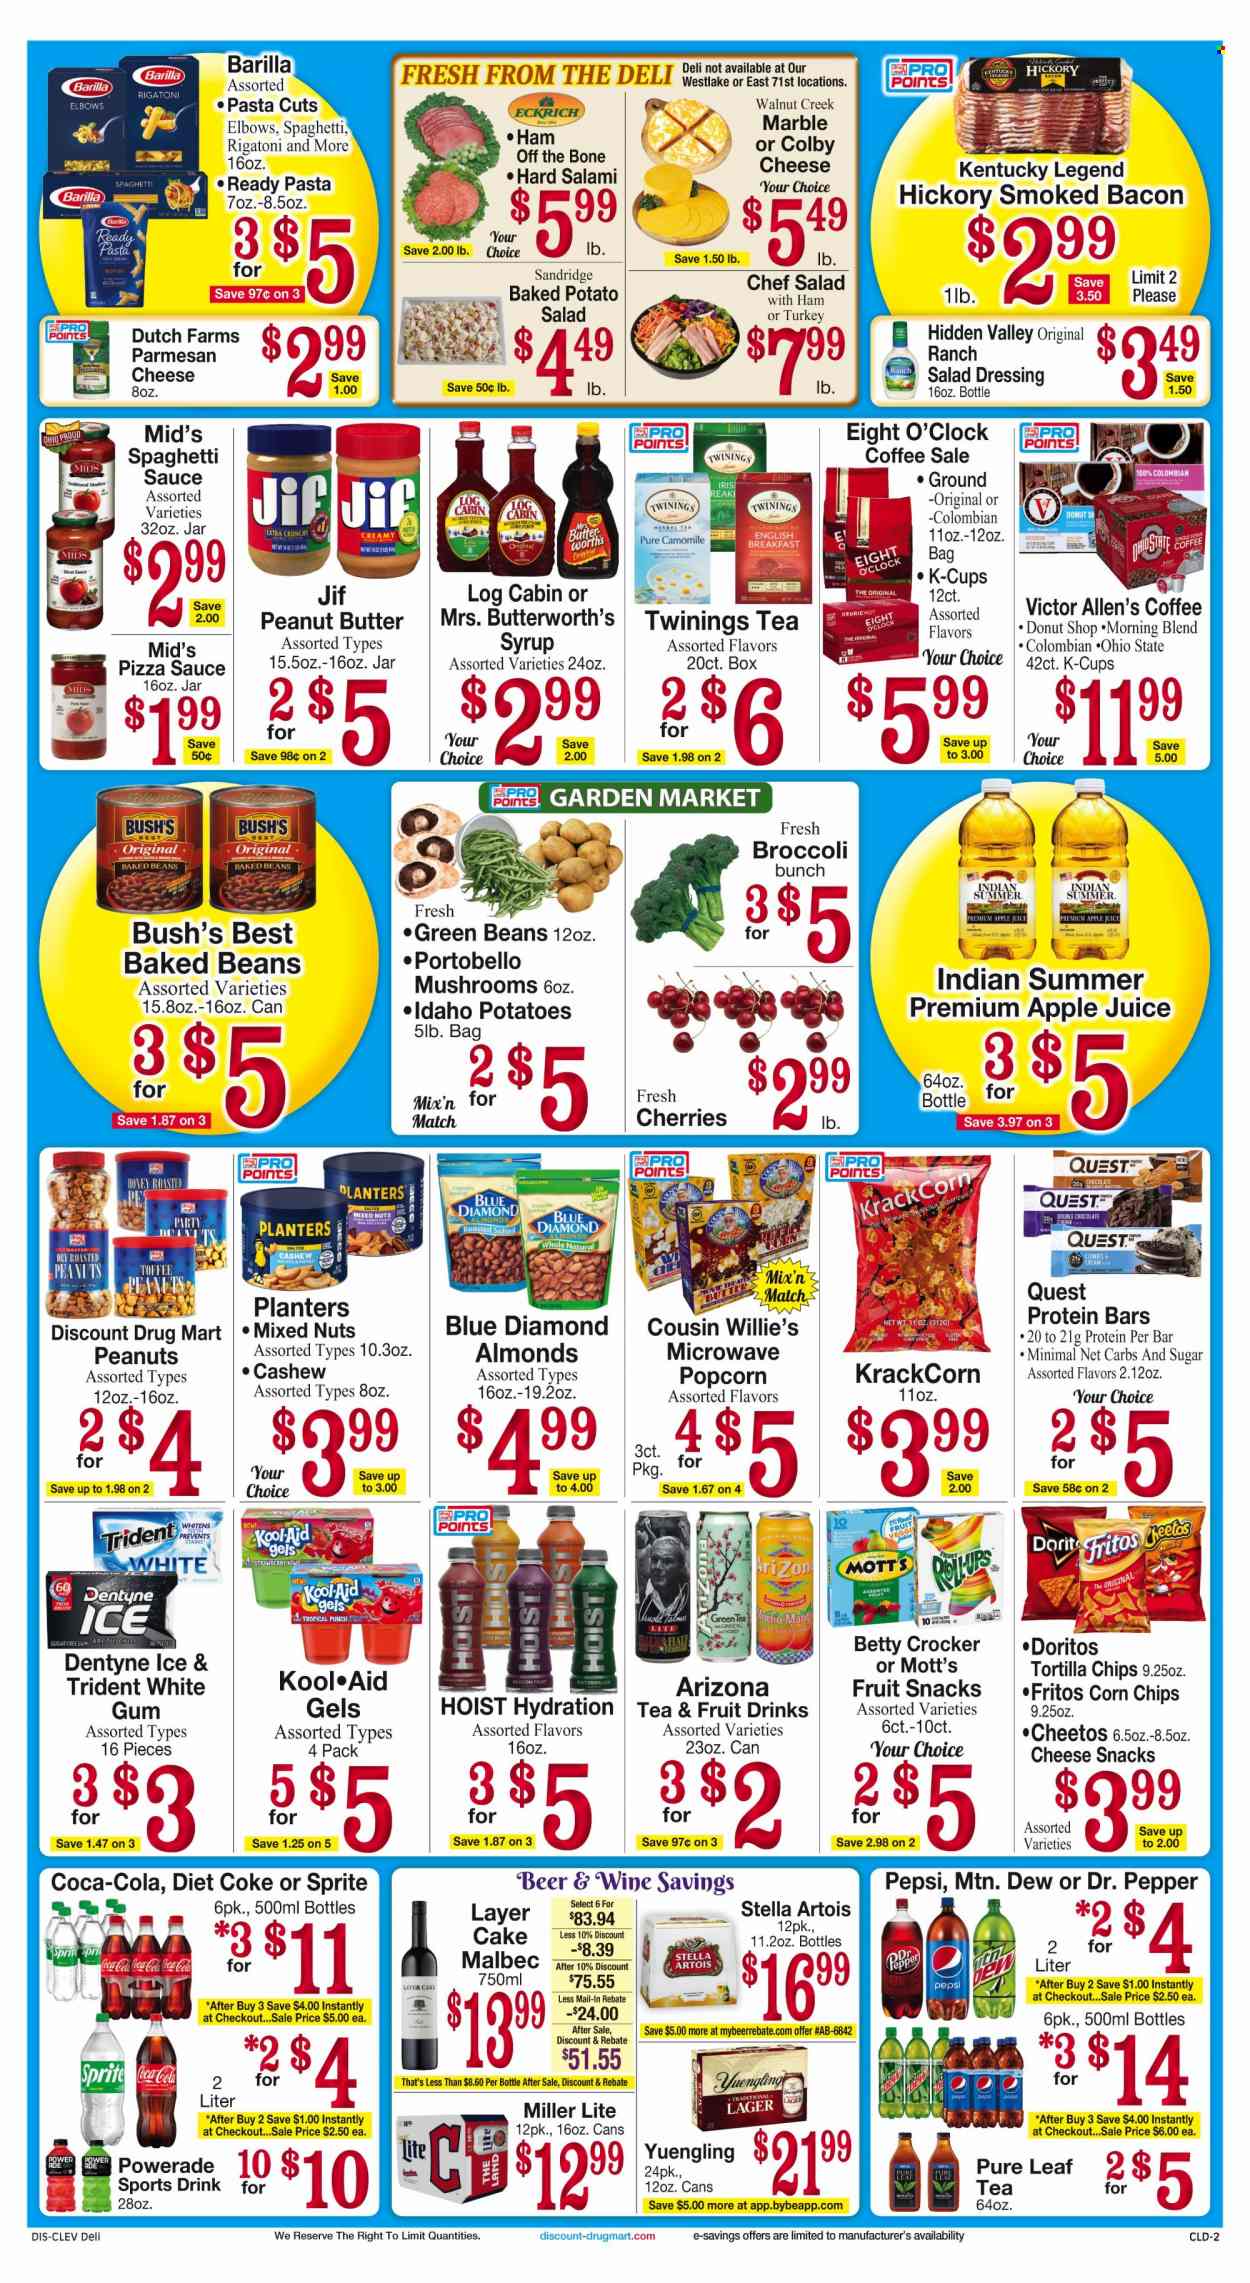 thumbnail - Discount Drug Mart Flyer - 06/07/2023 - 06/13/2023 - Sales products - portobello mushrooms, mushrooms, broccoli, green beans, potatoes, watermelon, Mott's, spaghetti, pasta, sauce, Barilla, spaghetti sauce, ready meal, salami, ham off the bone, potato salad, Colby cheese, parmesan, cookies, Trident, fruit snack, Doritos, Fritos, tortilla chips, Cheetos, chips, corn chips, popcorn, salty snack, baked beans, protein bar, salad dressing, dressing, honey, peanut butter, syrup, Jif, almonds, roasted peanuts, peanuts, mixed nuts, Planters, Blue Diamond, apple juice, Coca-Cola, Mountain Dew, Sprite, Powerade, Pepsi, juice, energy drink, Dr. Pepper, Diet Coke, soft drink, AriZona, fruit punch, Coke, green tea, herbal tea, Twinings, Pure Leaf, coffee, coffee capsules, K-Cups, Eight O'Clock, red wine, wine, alcohol, Malbec, beer, Stella Artois, Lager, turkey, jar, ginseng, Miller Lite, Yuengling. Page 2.